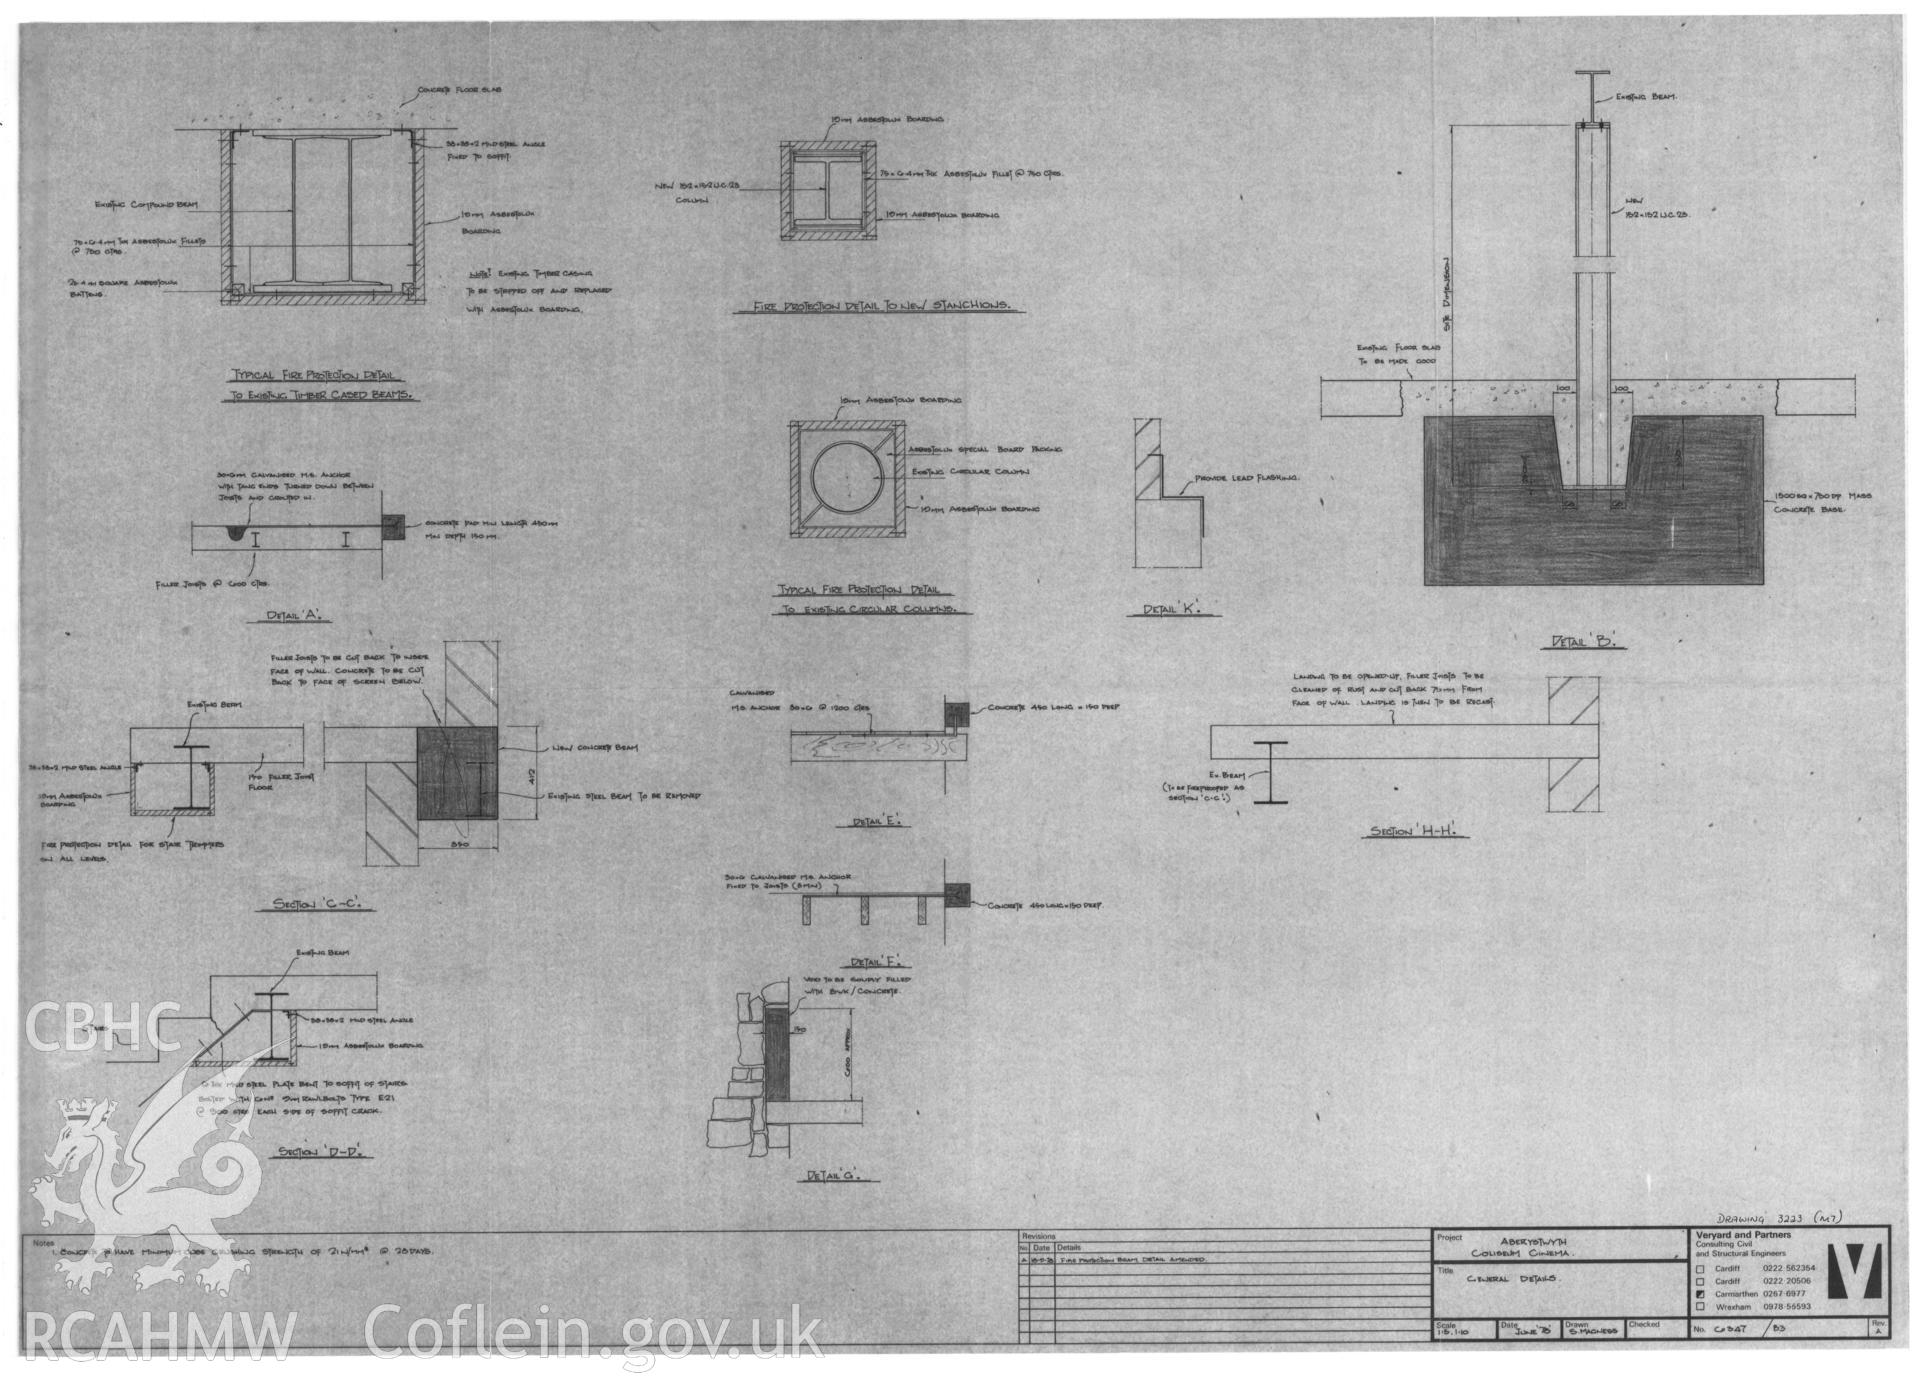 Copy of a non RCAHMW drawing showing general detail at Coliseum Cinema, Aberystwyth, received in the course of threatened buildings case ref no M/DES/B/CD/79/01